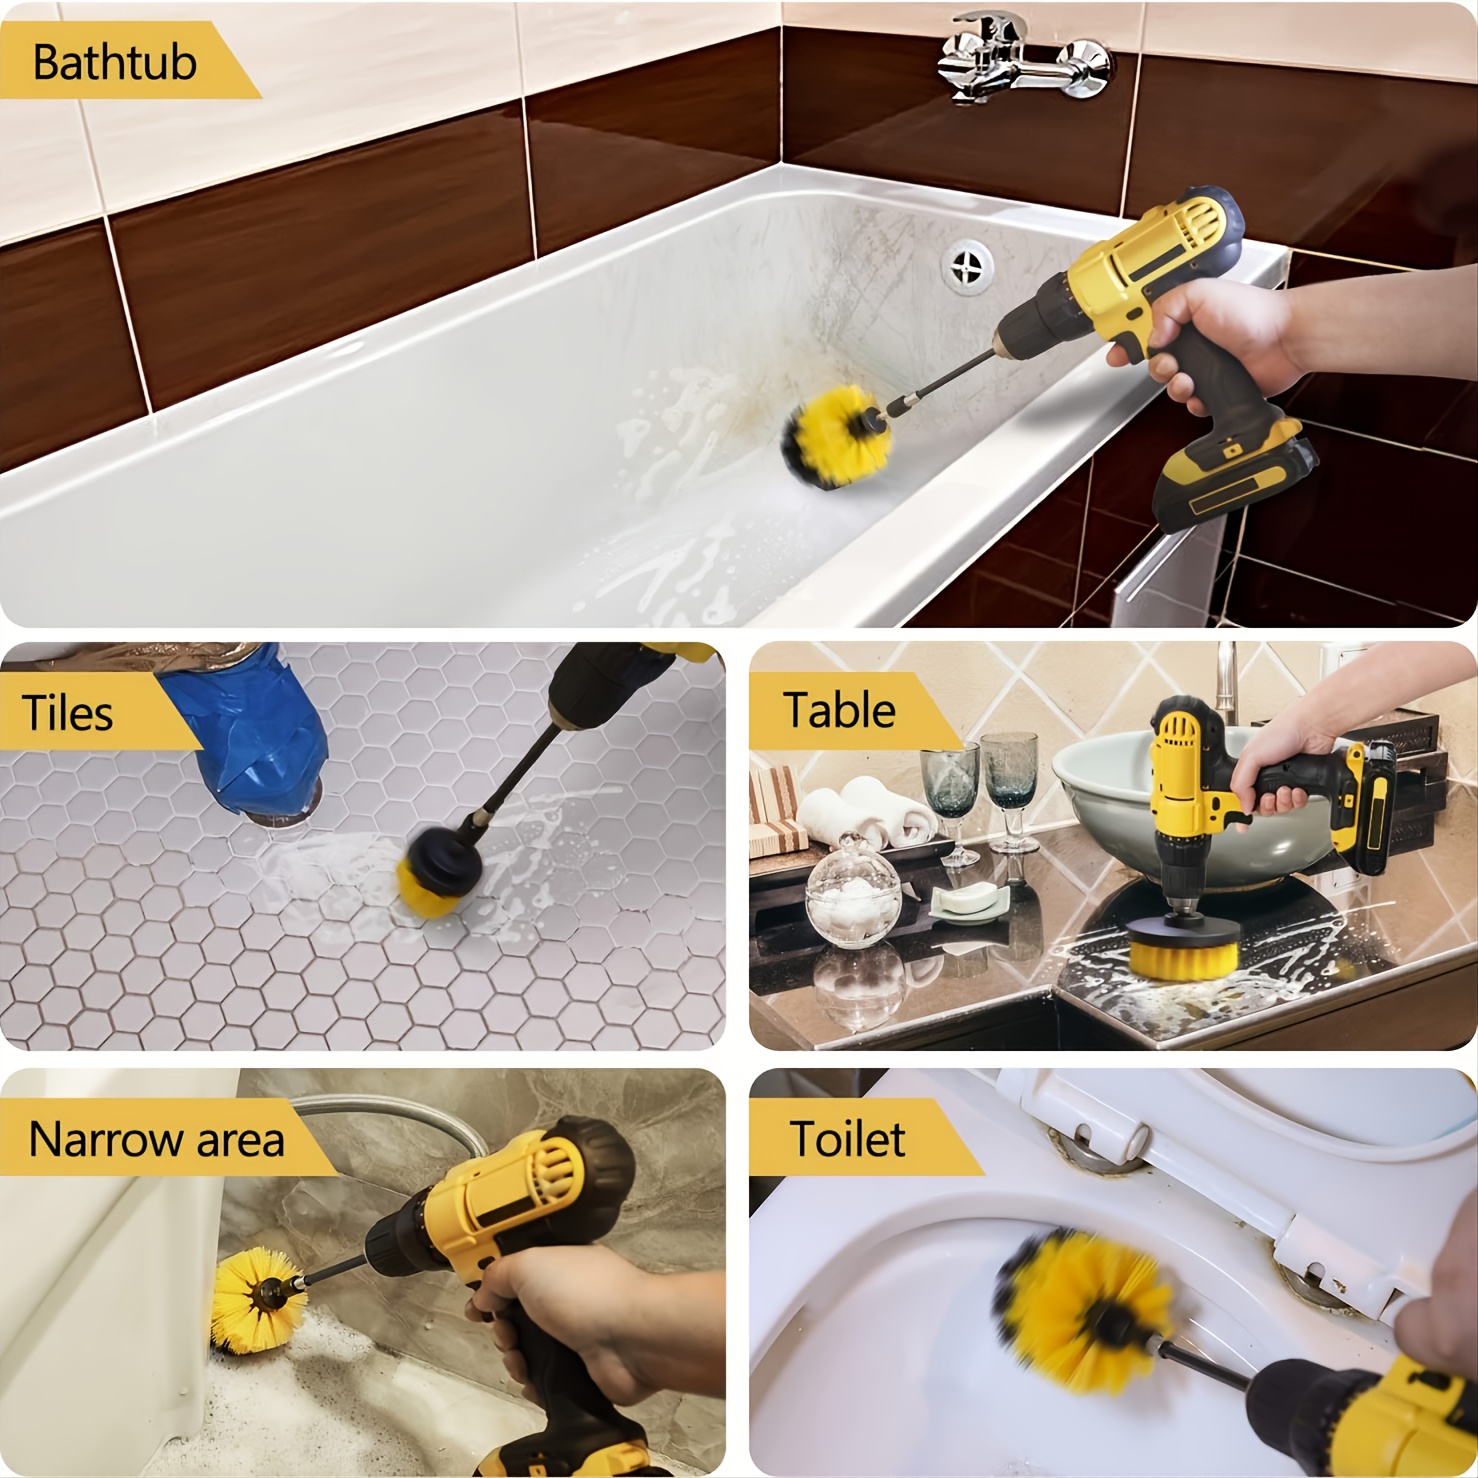 Drill Brush Attachment Set, Scrub Brush Power Scrubber Drill Brush Kit(11 Pieces), Scouring Pad All Purpose Cleaning Kit for Bathroom, Toilet, Grout